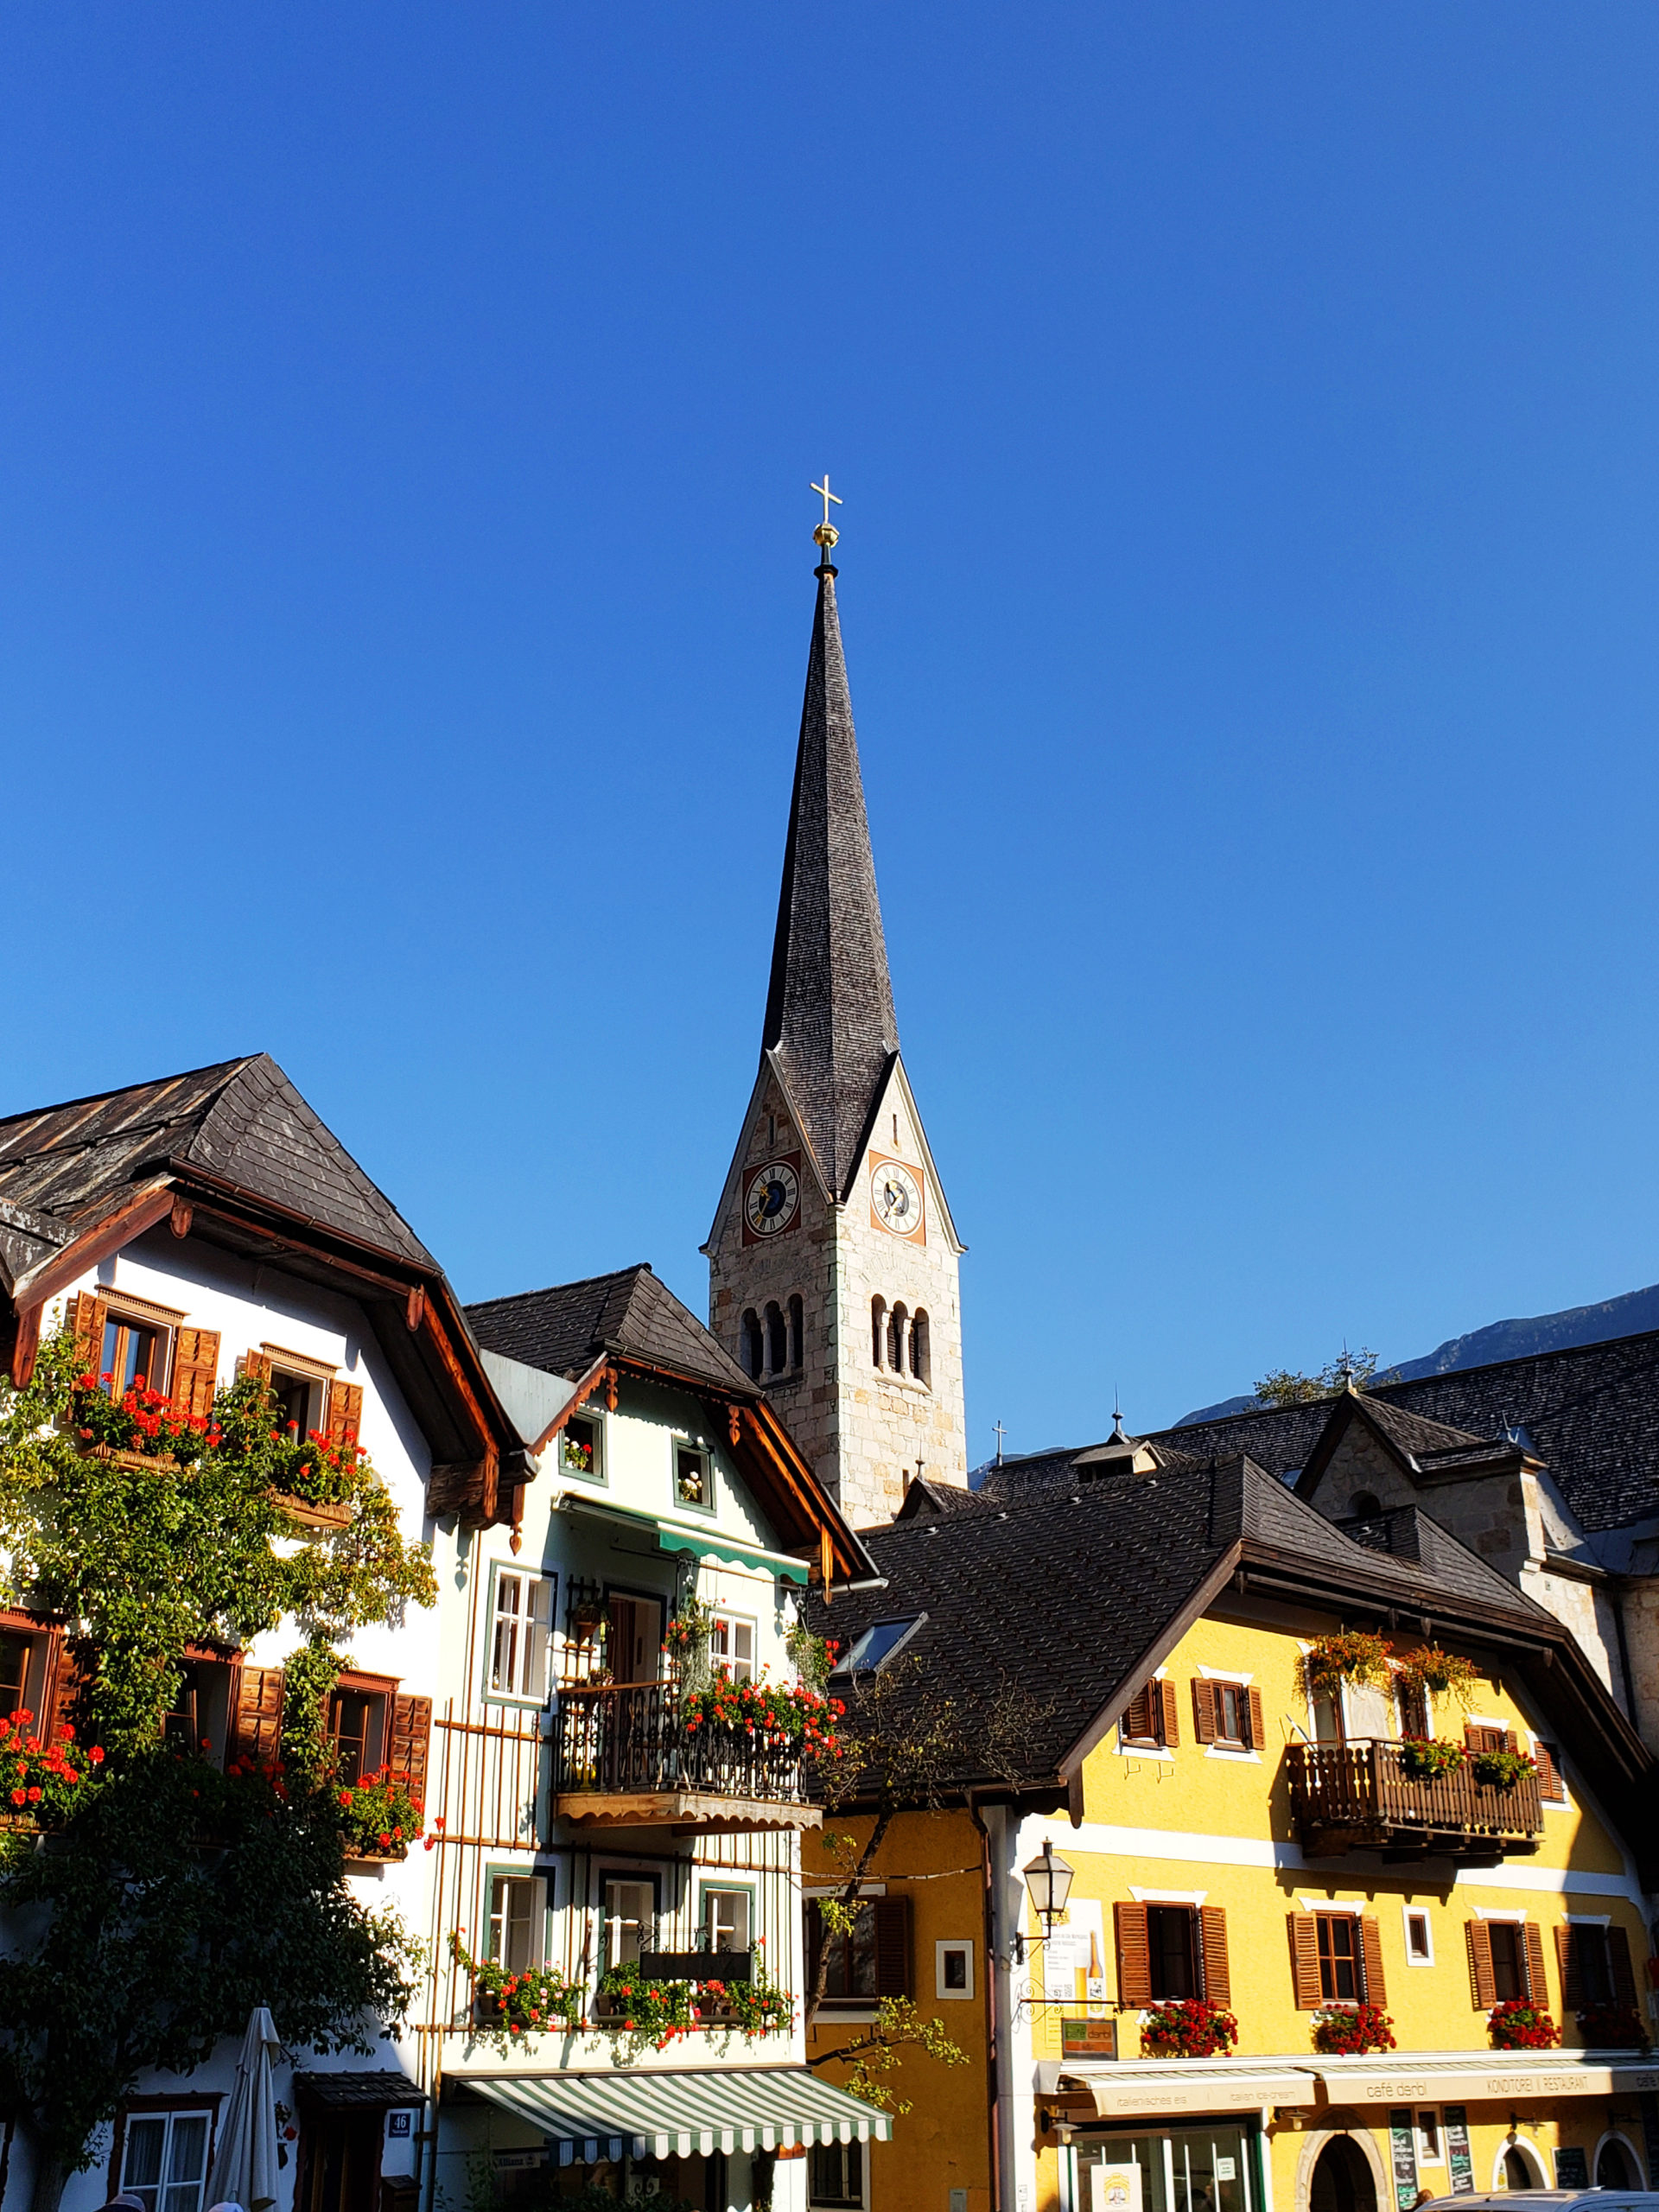 My Favourite Small European Towns & Villages